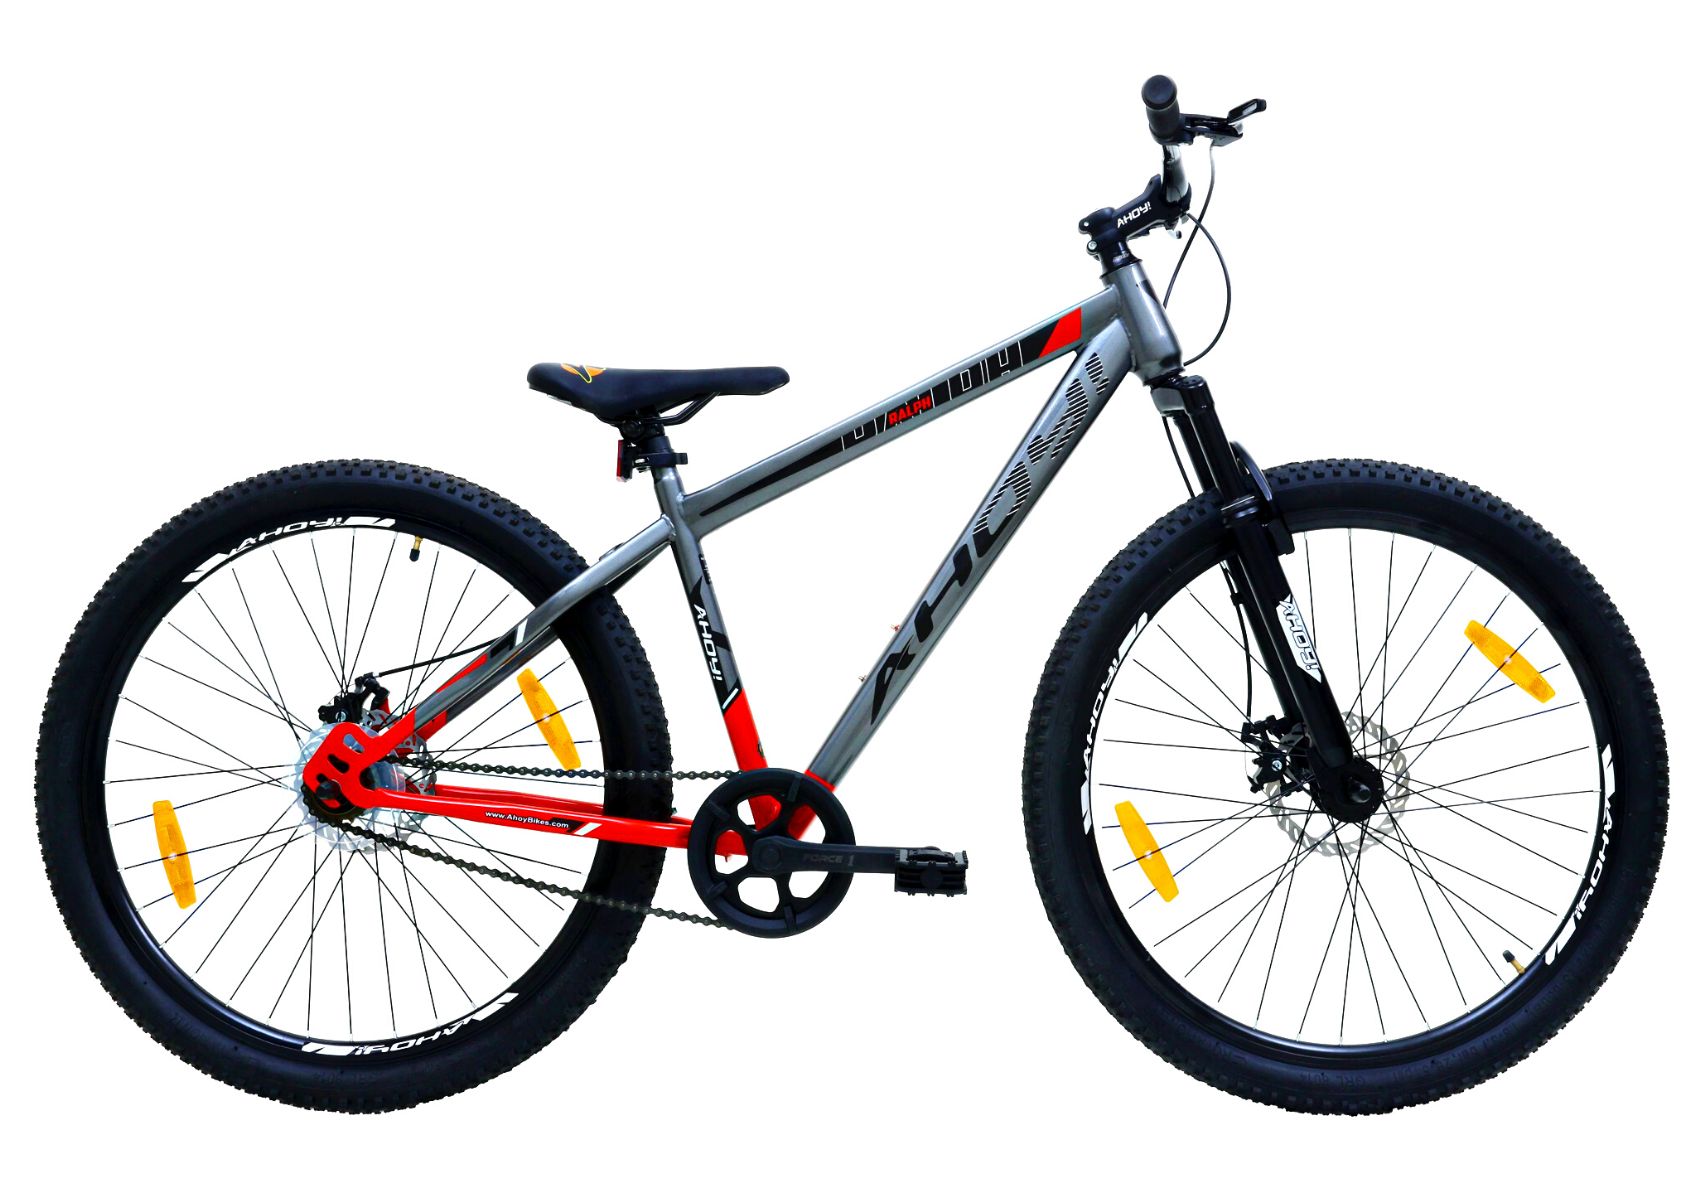 Ralph Bike Without Gear 29T | Buy Red Non Gear Cycle for Men